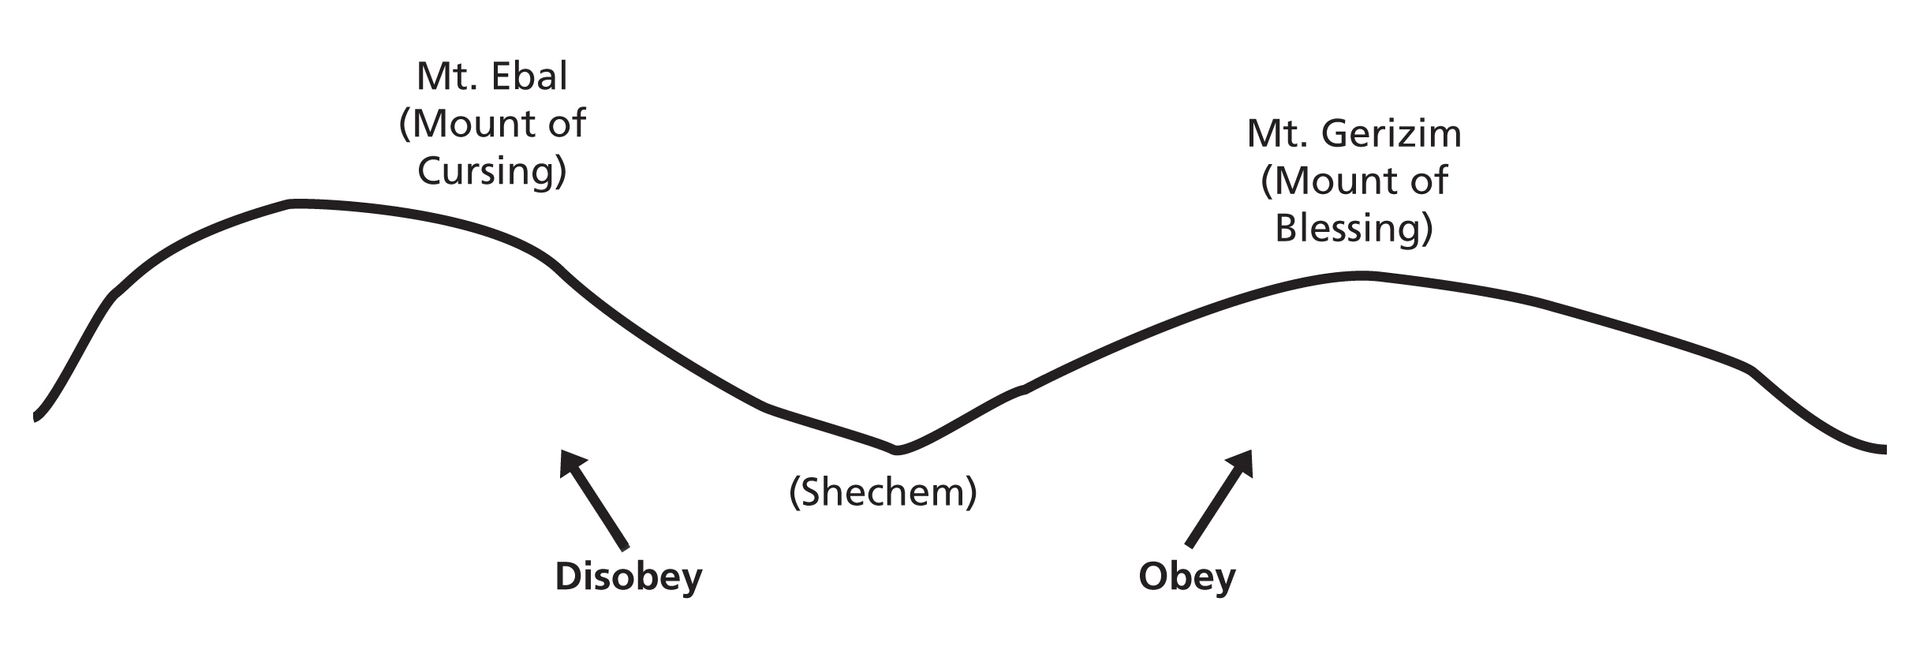 A line drawing of mountains labeled “Mt. Ebal” and “Mt. Gerizim.”